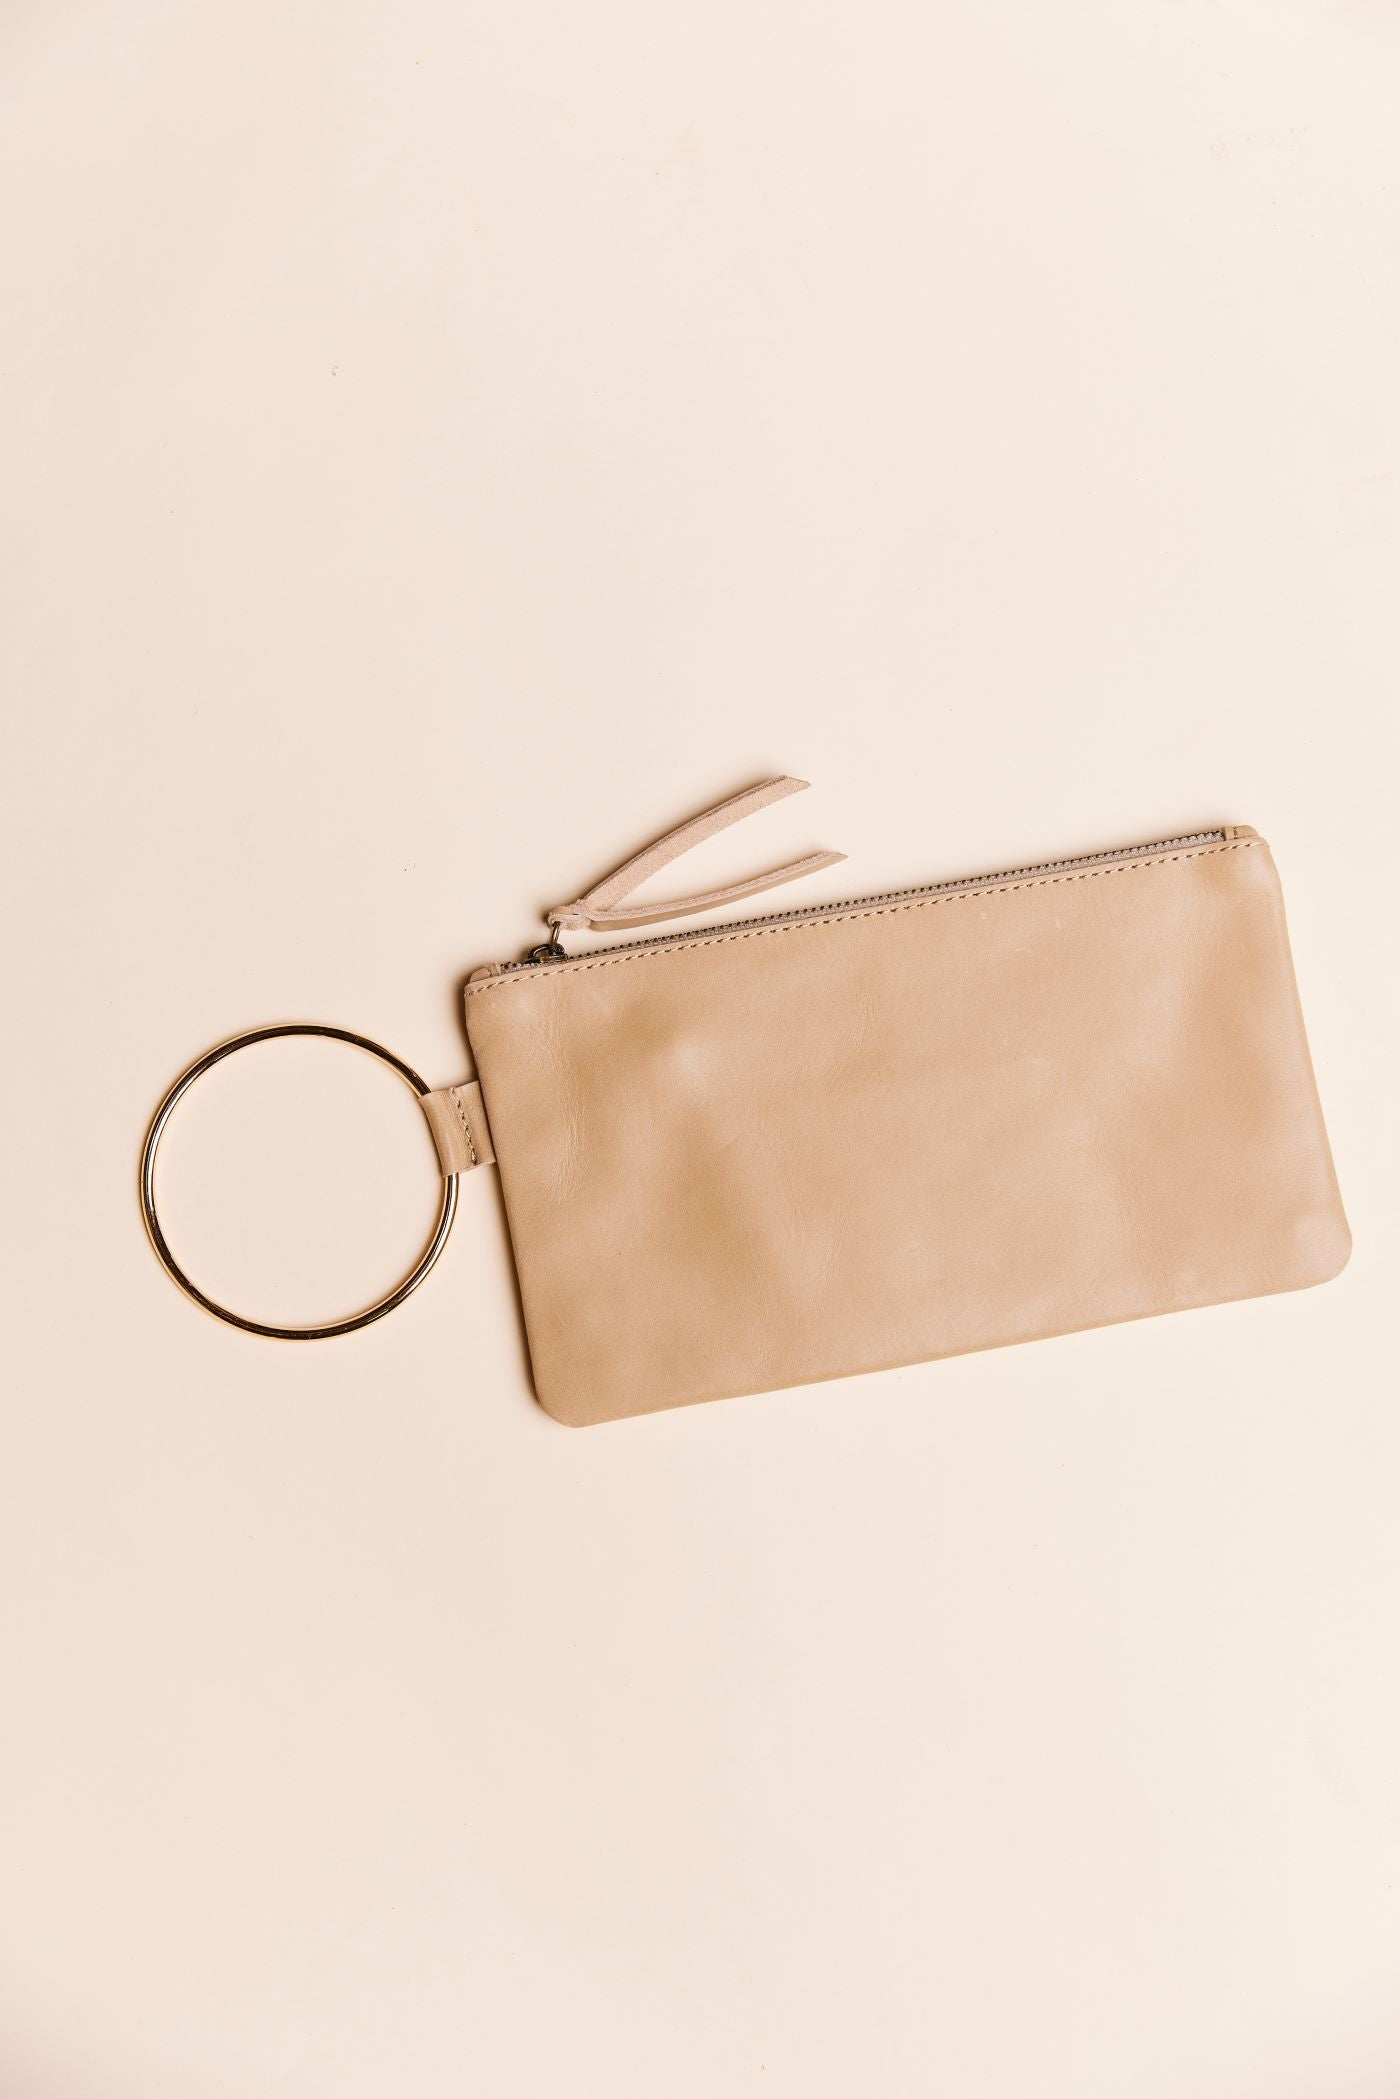 Fozi Wristlet in Pebble by ABLE